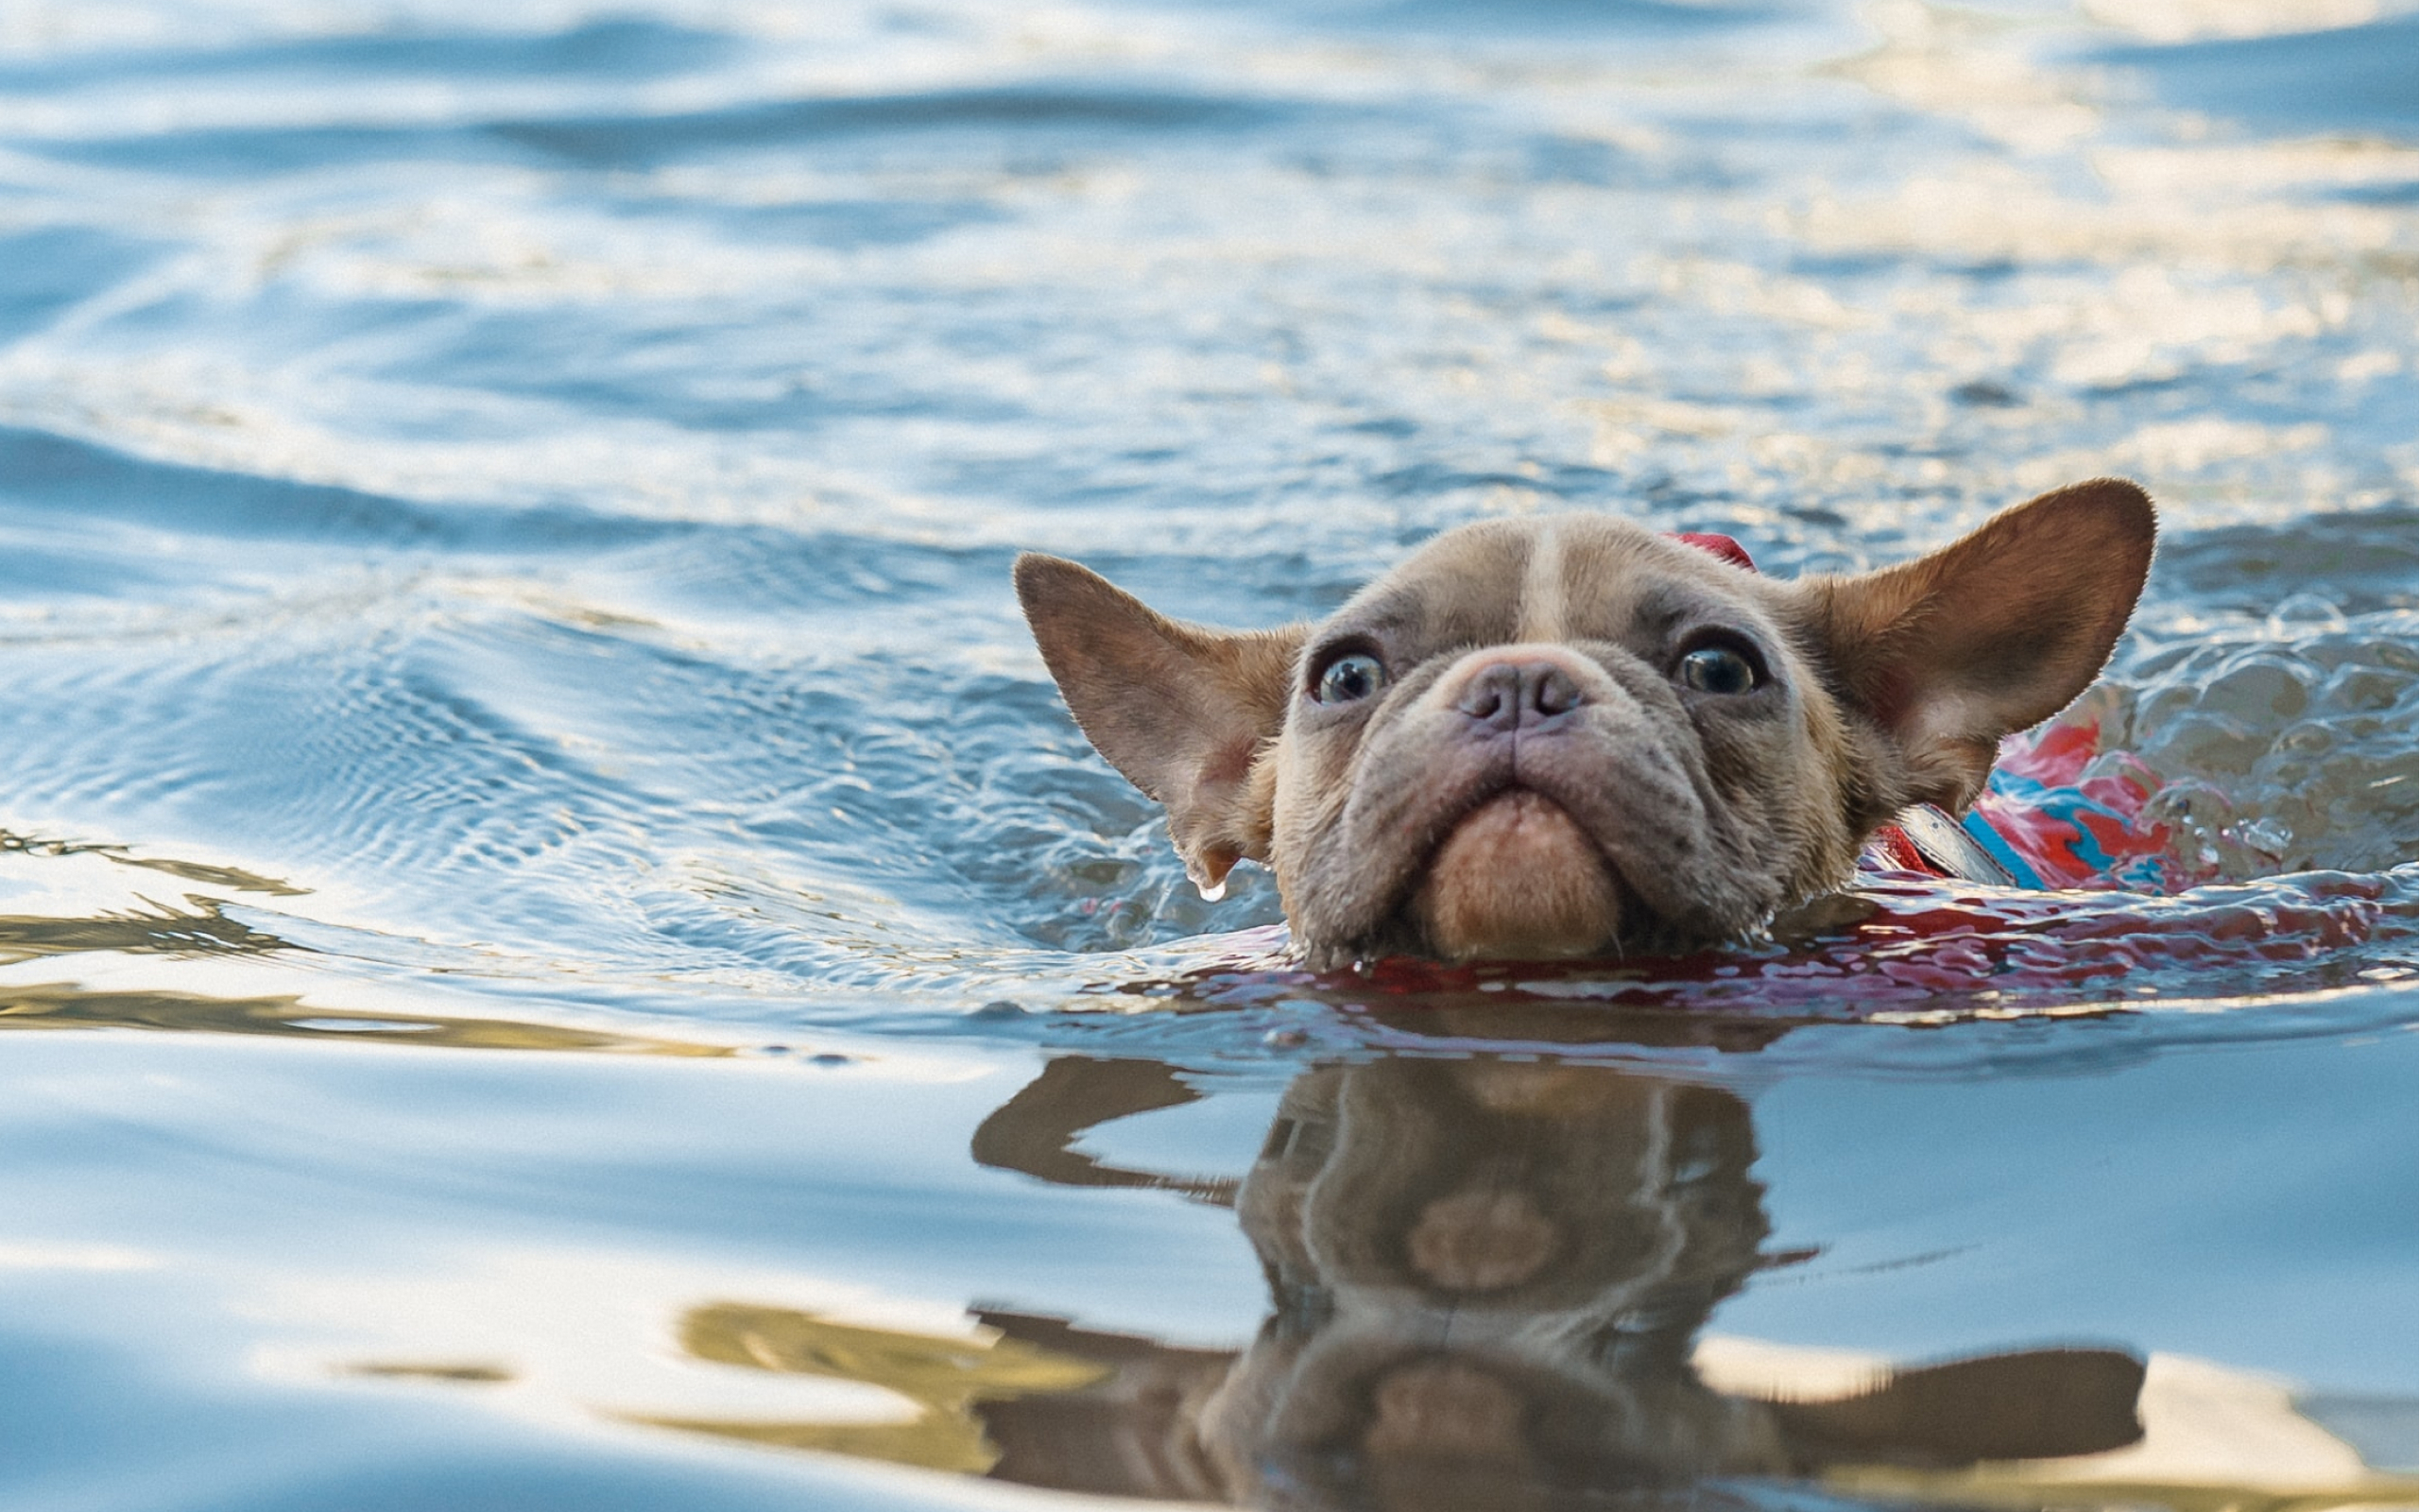 A Bulldog playing in the water